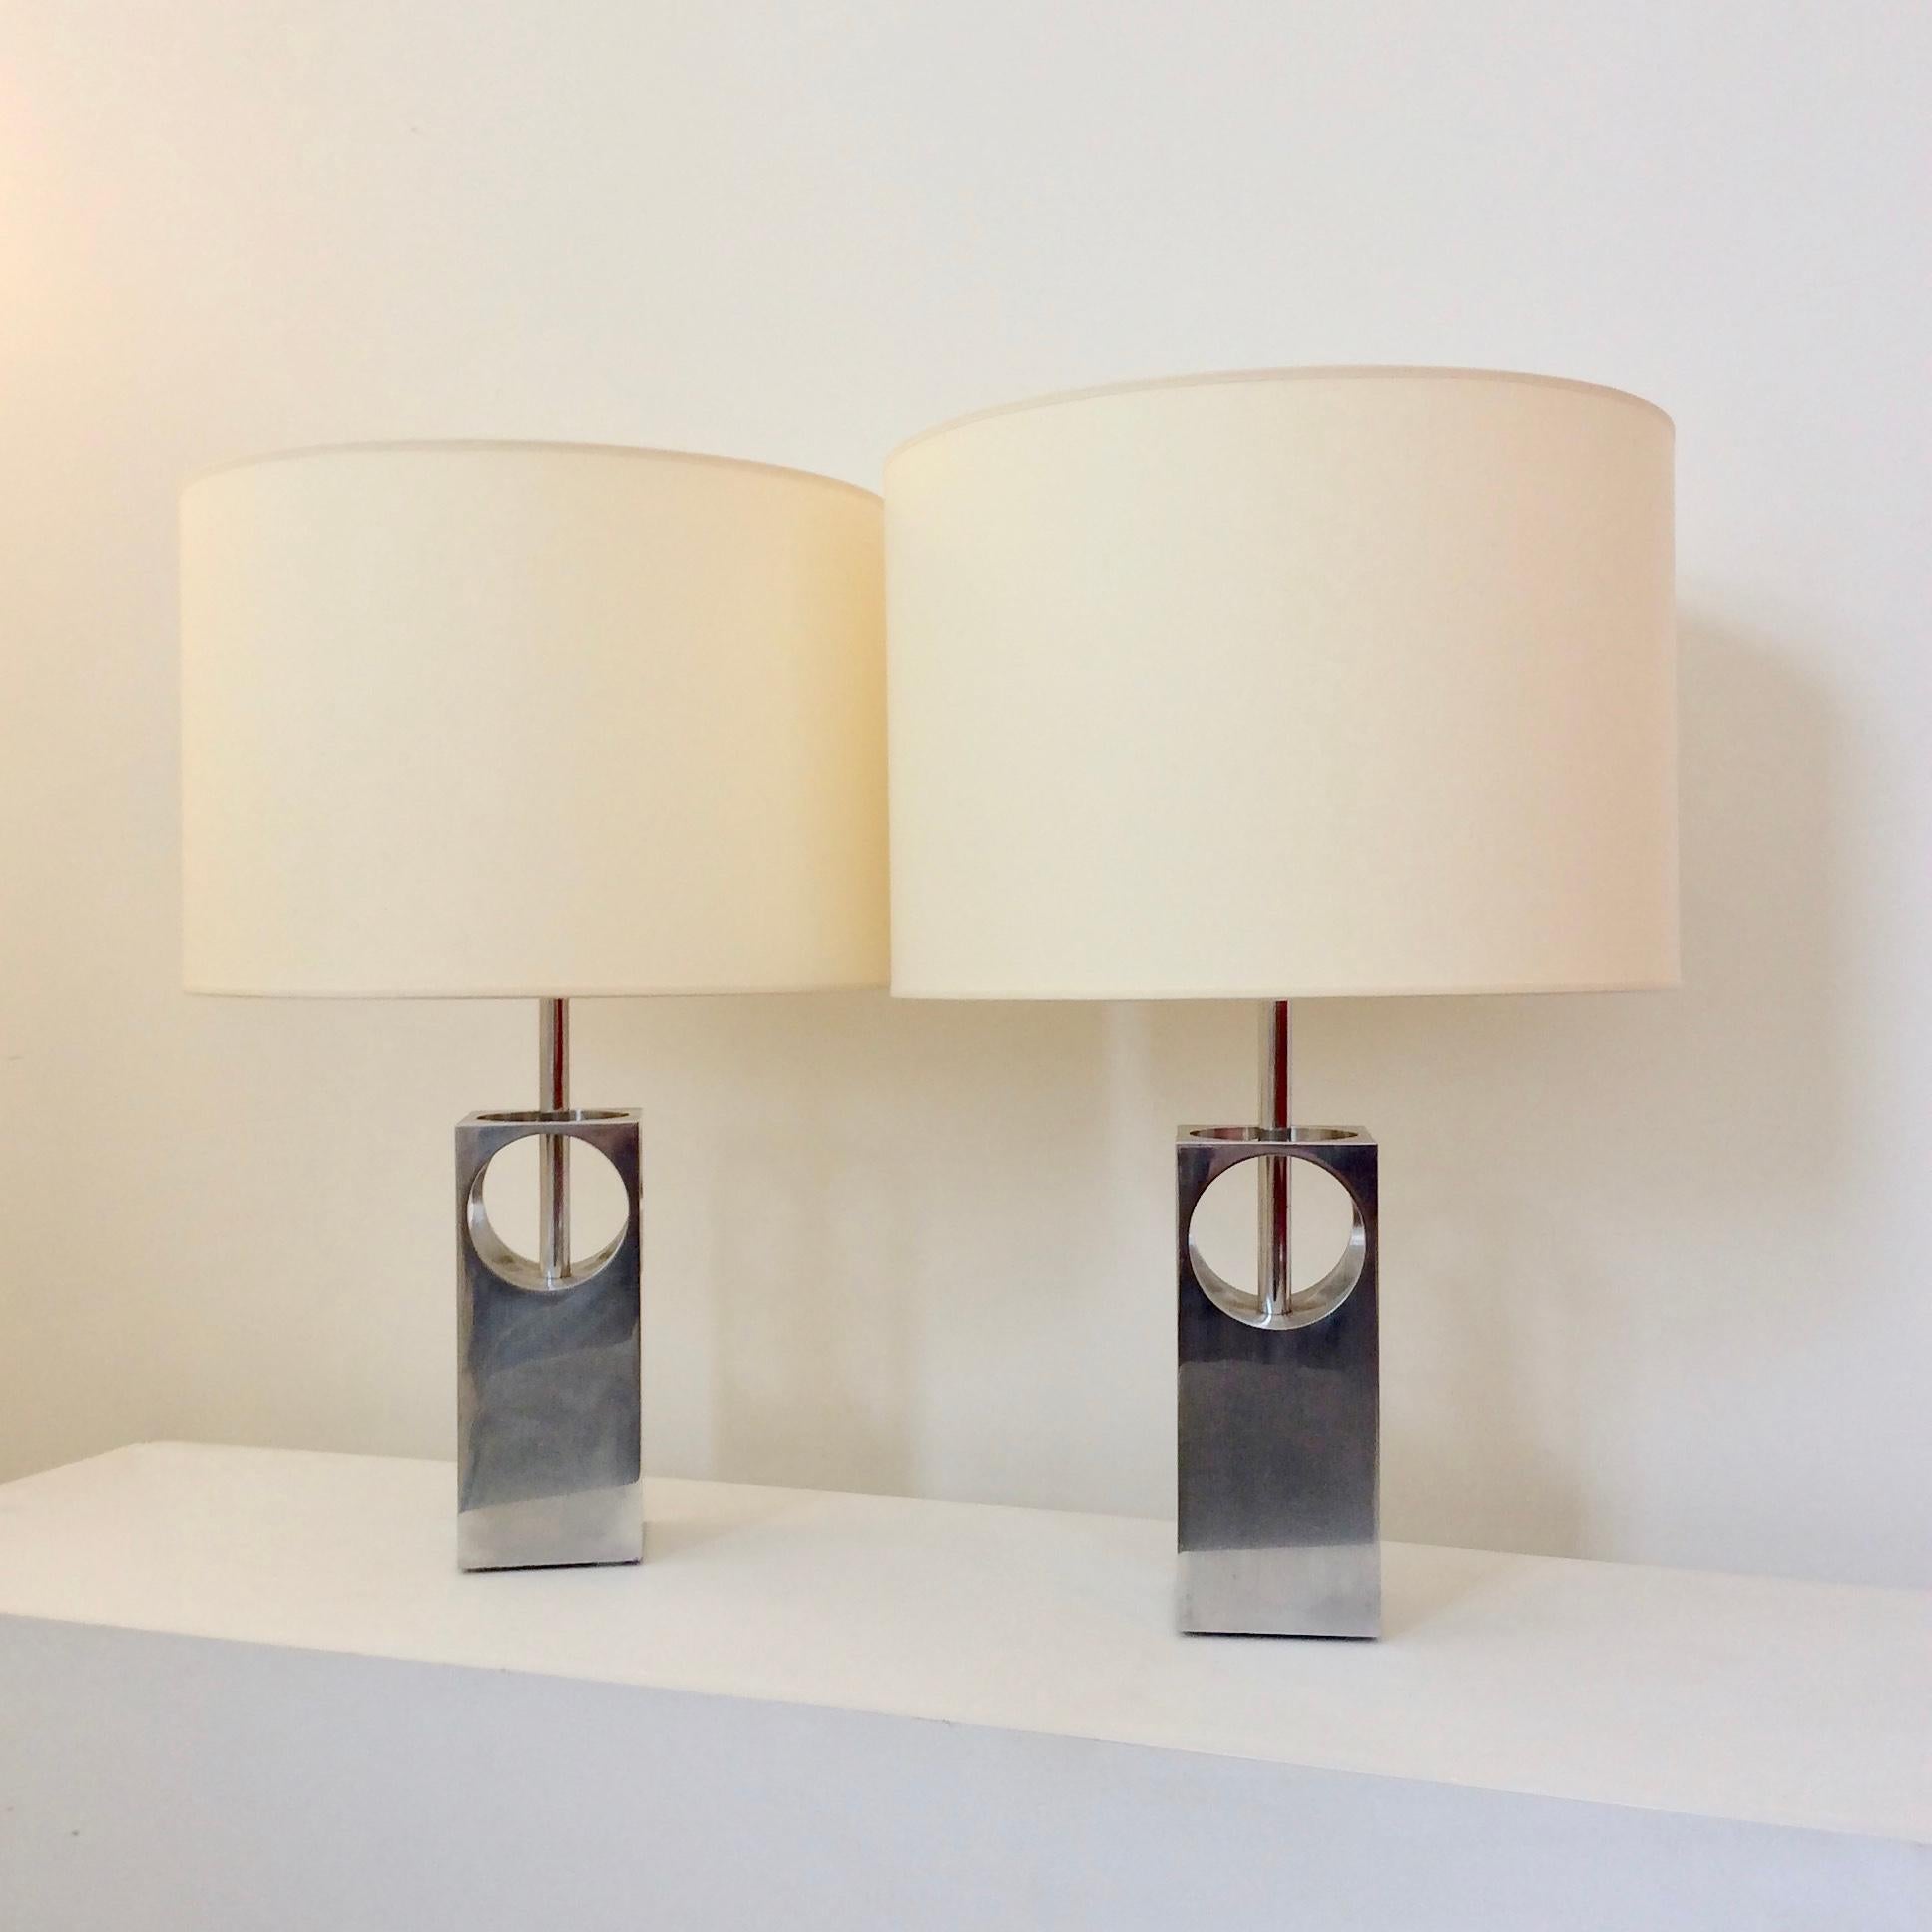 Nice pair of table lamps, circa 1970, France.
Polished aluminium, new ivory fabric shade.
Dimensions: 48 cm height, 32 cm diameter.
Good condition.
We ship worldwide.
All purchases are covered by our Buyer Protection Guarantee.
This item can be